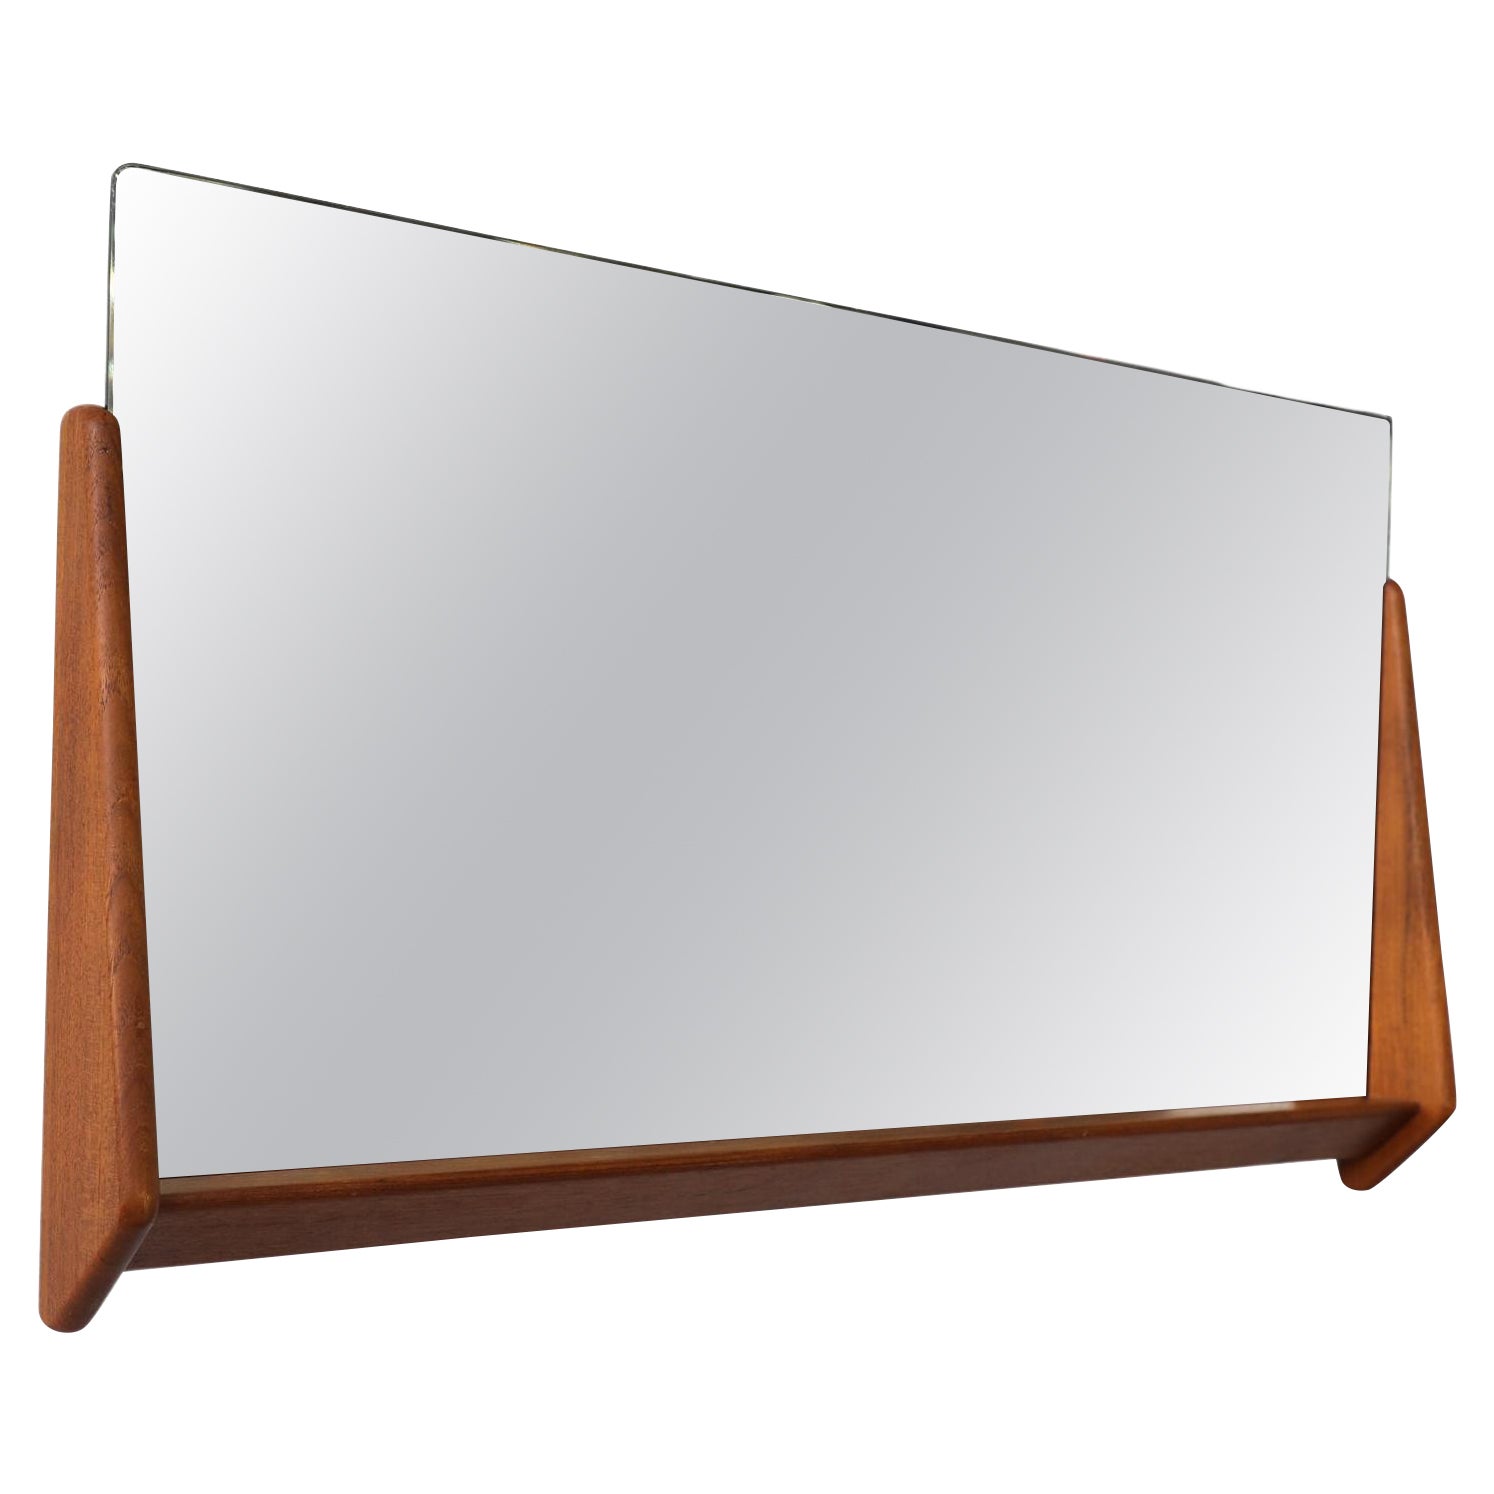 Midcentury Wall Mounted Mirror with Teak Frame